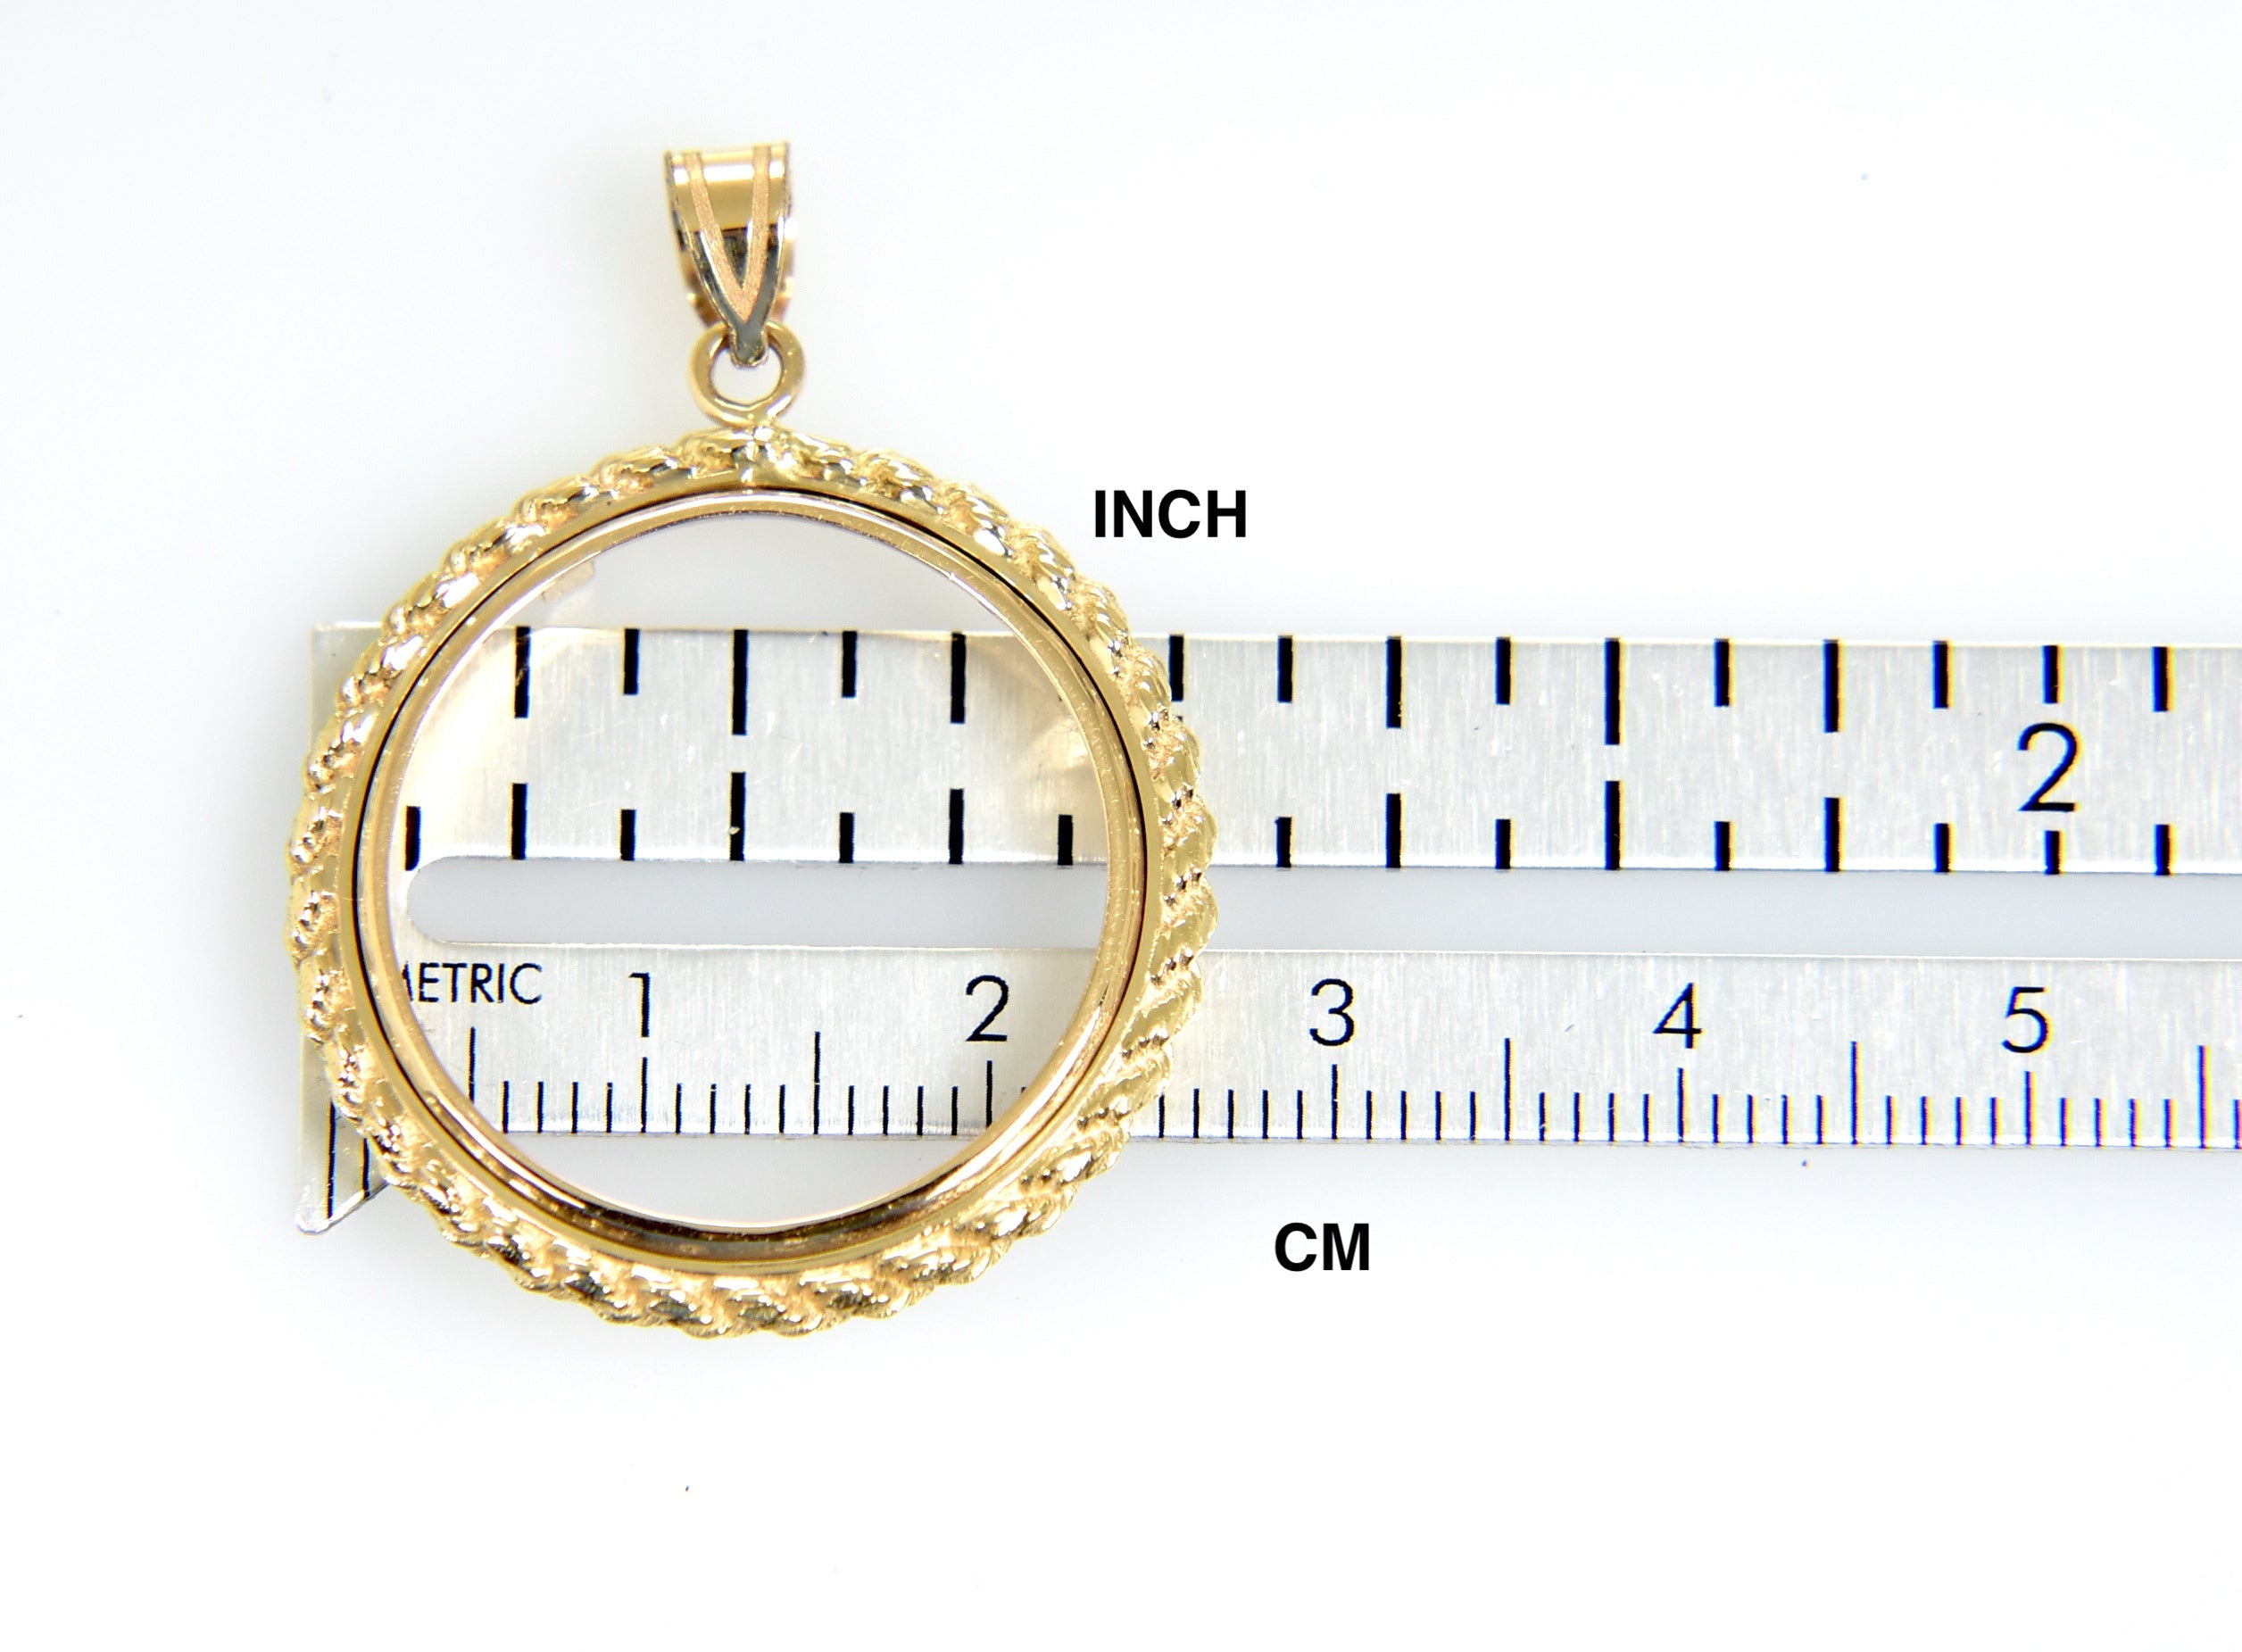 14K Yellow Gold 1/4 oz American Eagle 1/4 oz Panda US $5 Dollar Jamestown 2 Rand Coin Holder Rope Polished Prong Bezel Pendant Charm for 22mm Coins